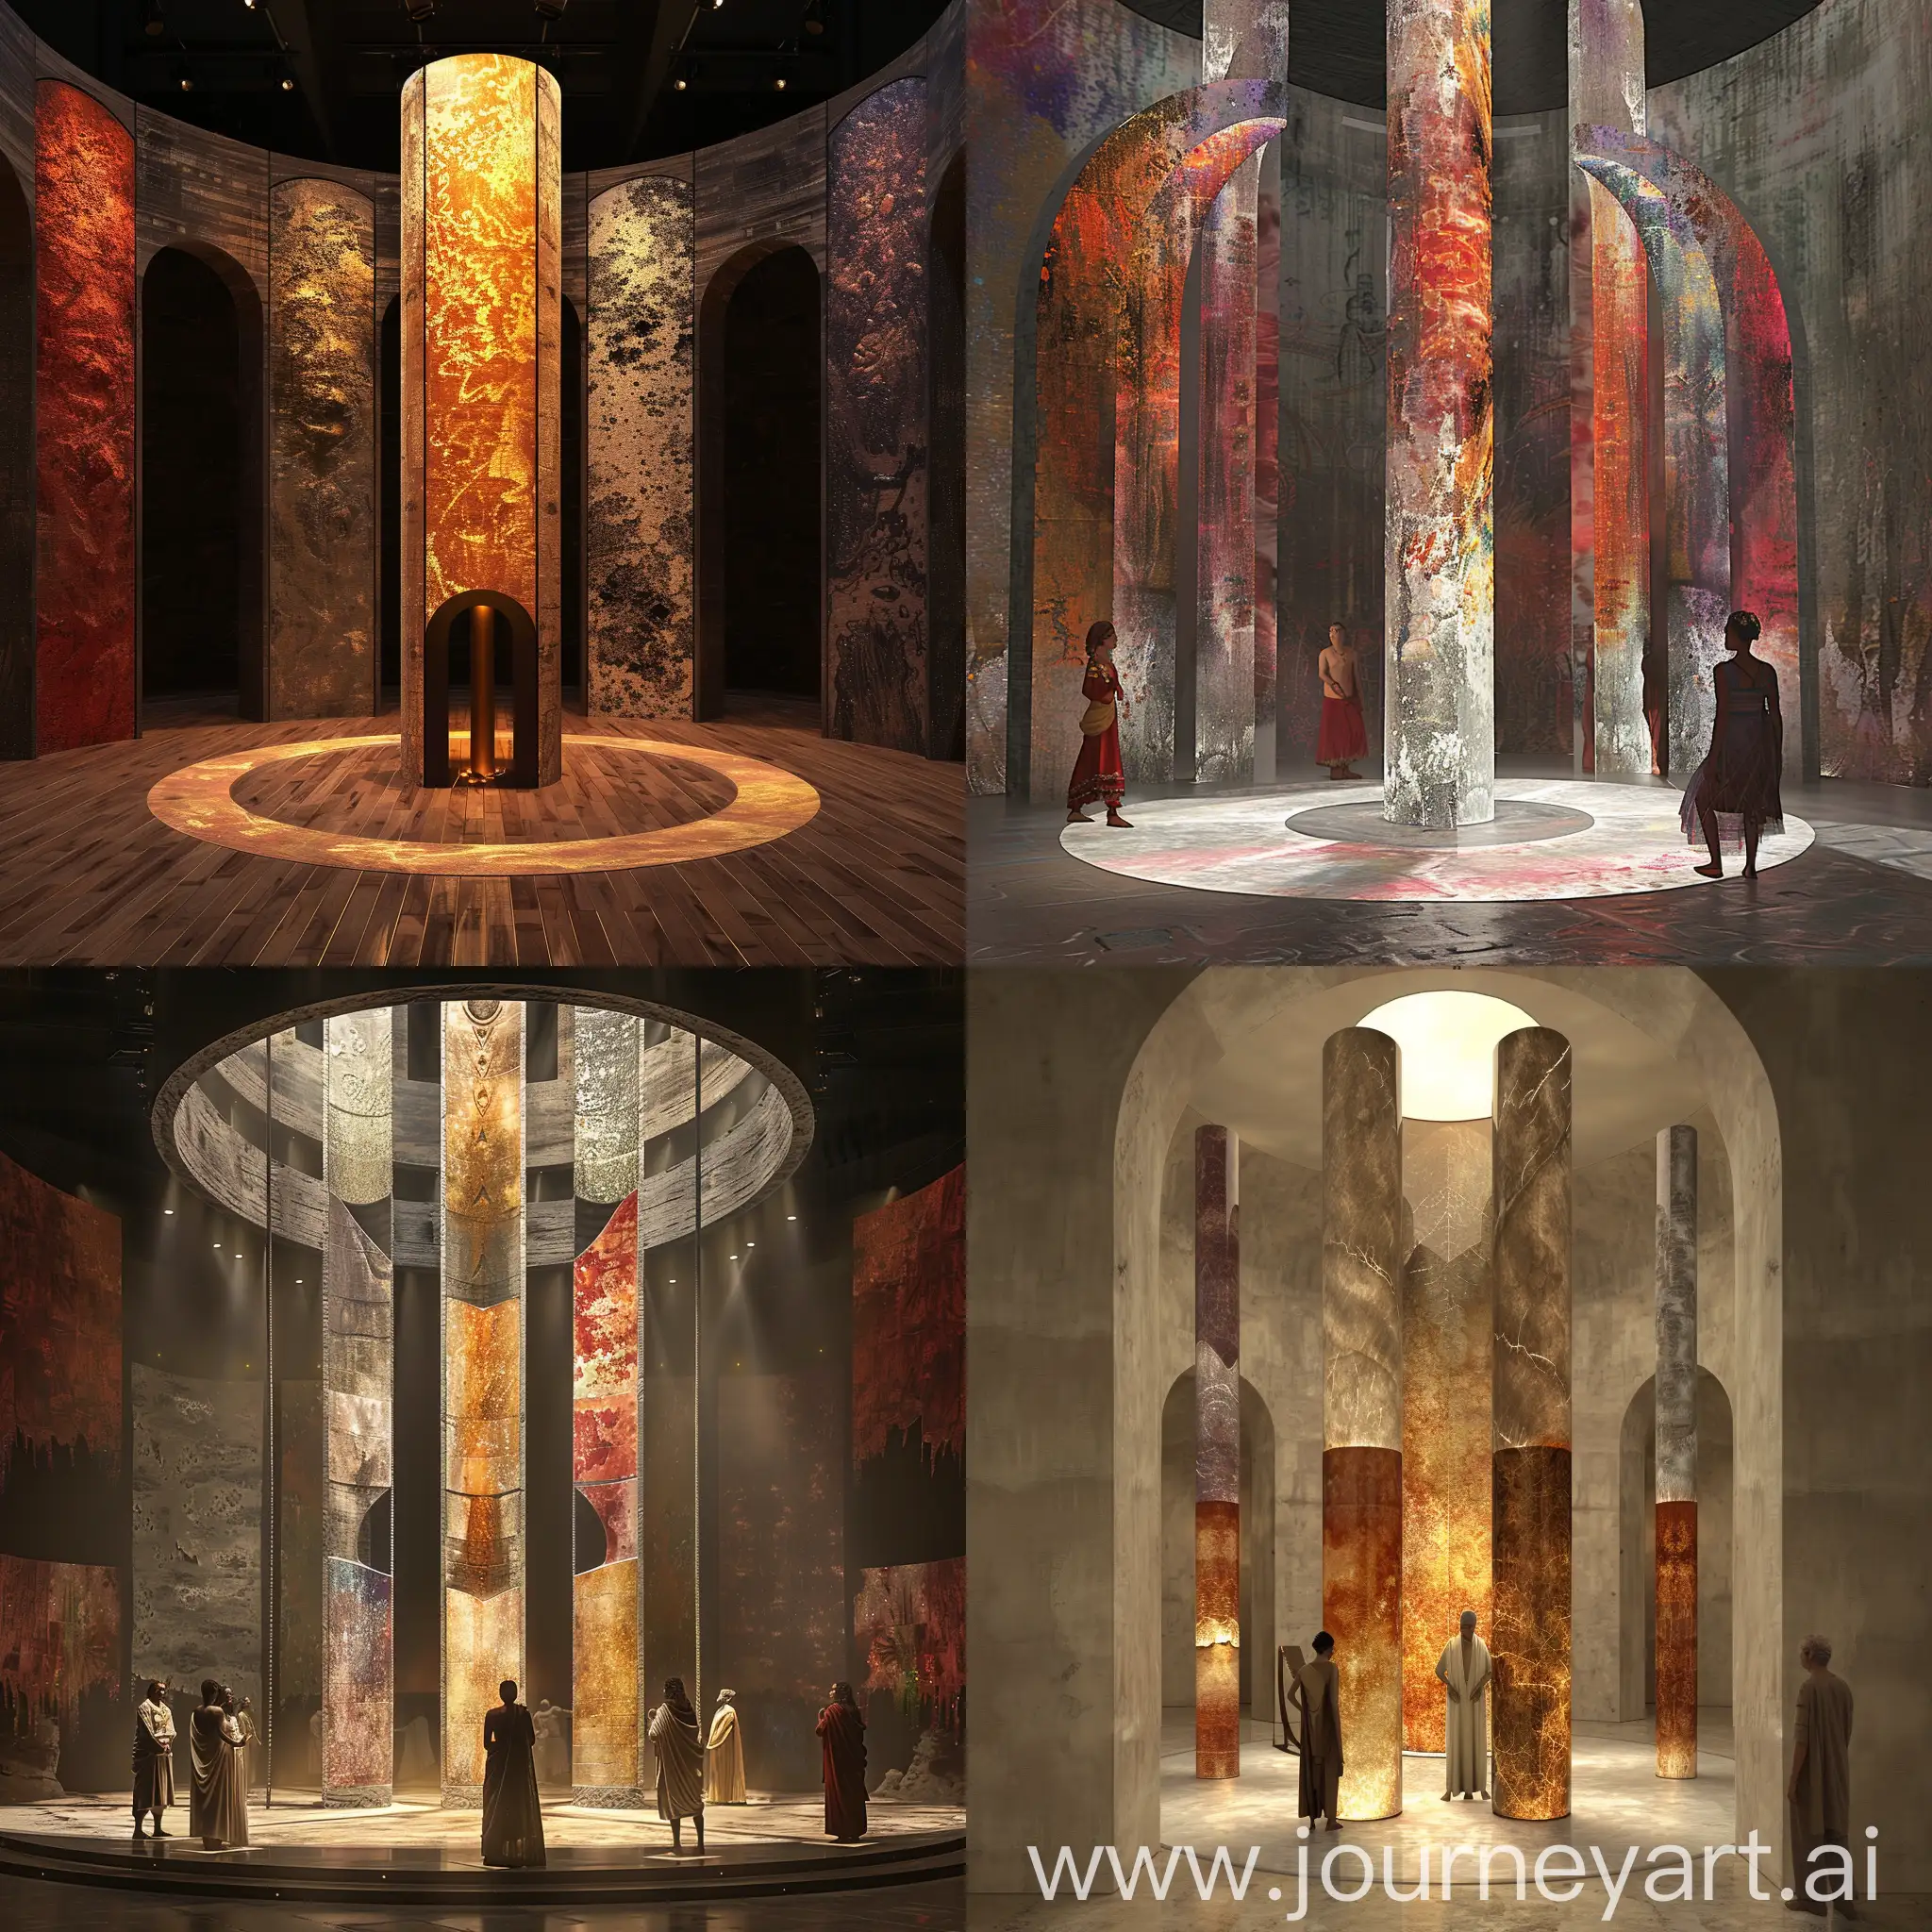 Create a central pillar or a series of arches as the focal point of the performance space or a prominent foyer area.Each section of the pillar or arch would represent one of the nine rasas using a combination of visual elements, textures, and potentially even lighting effects.